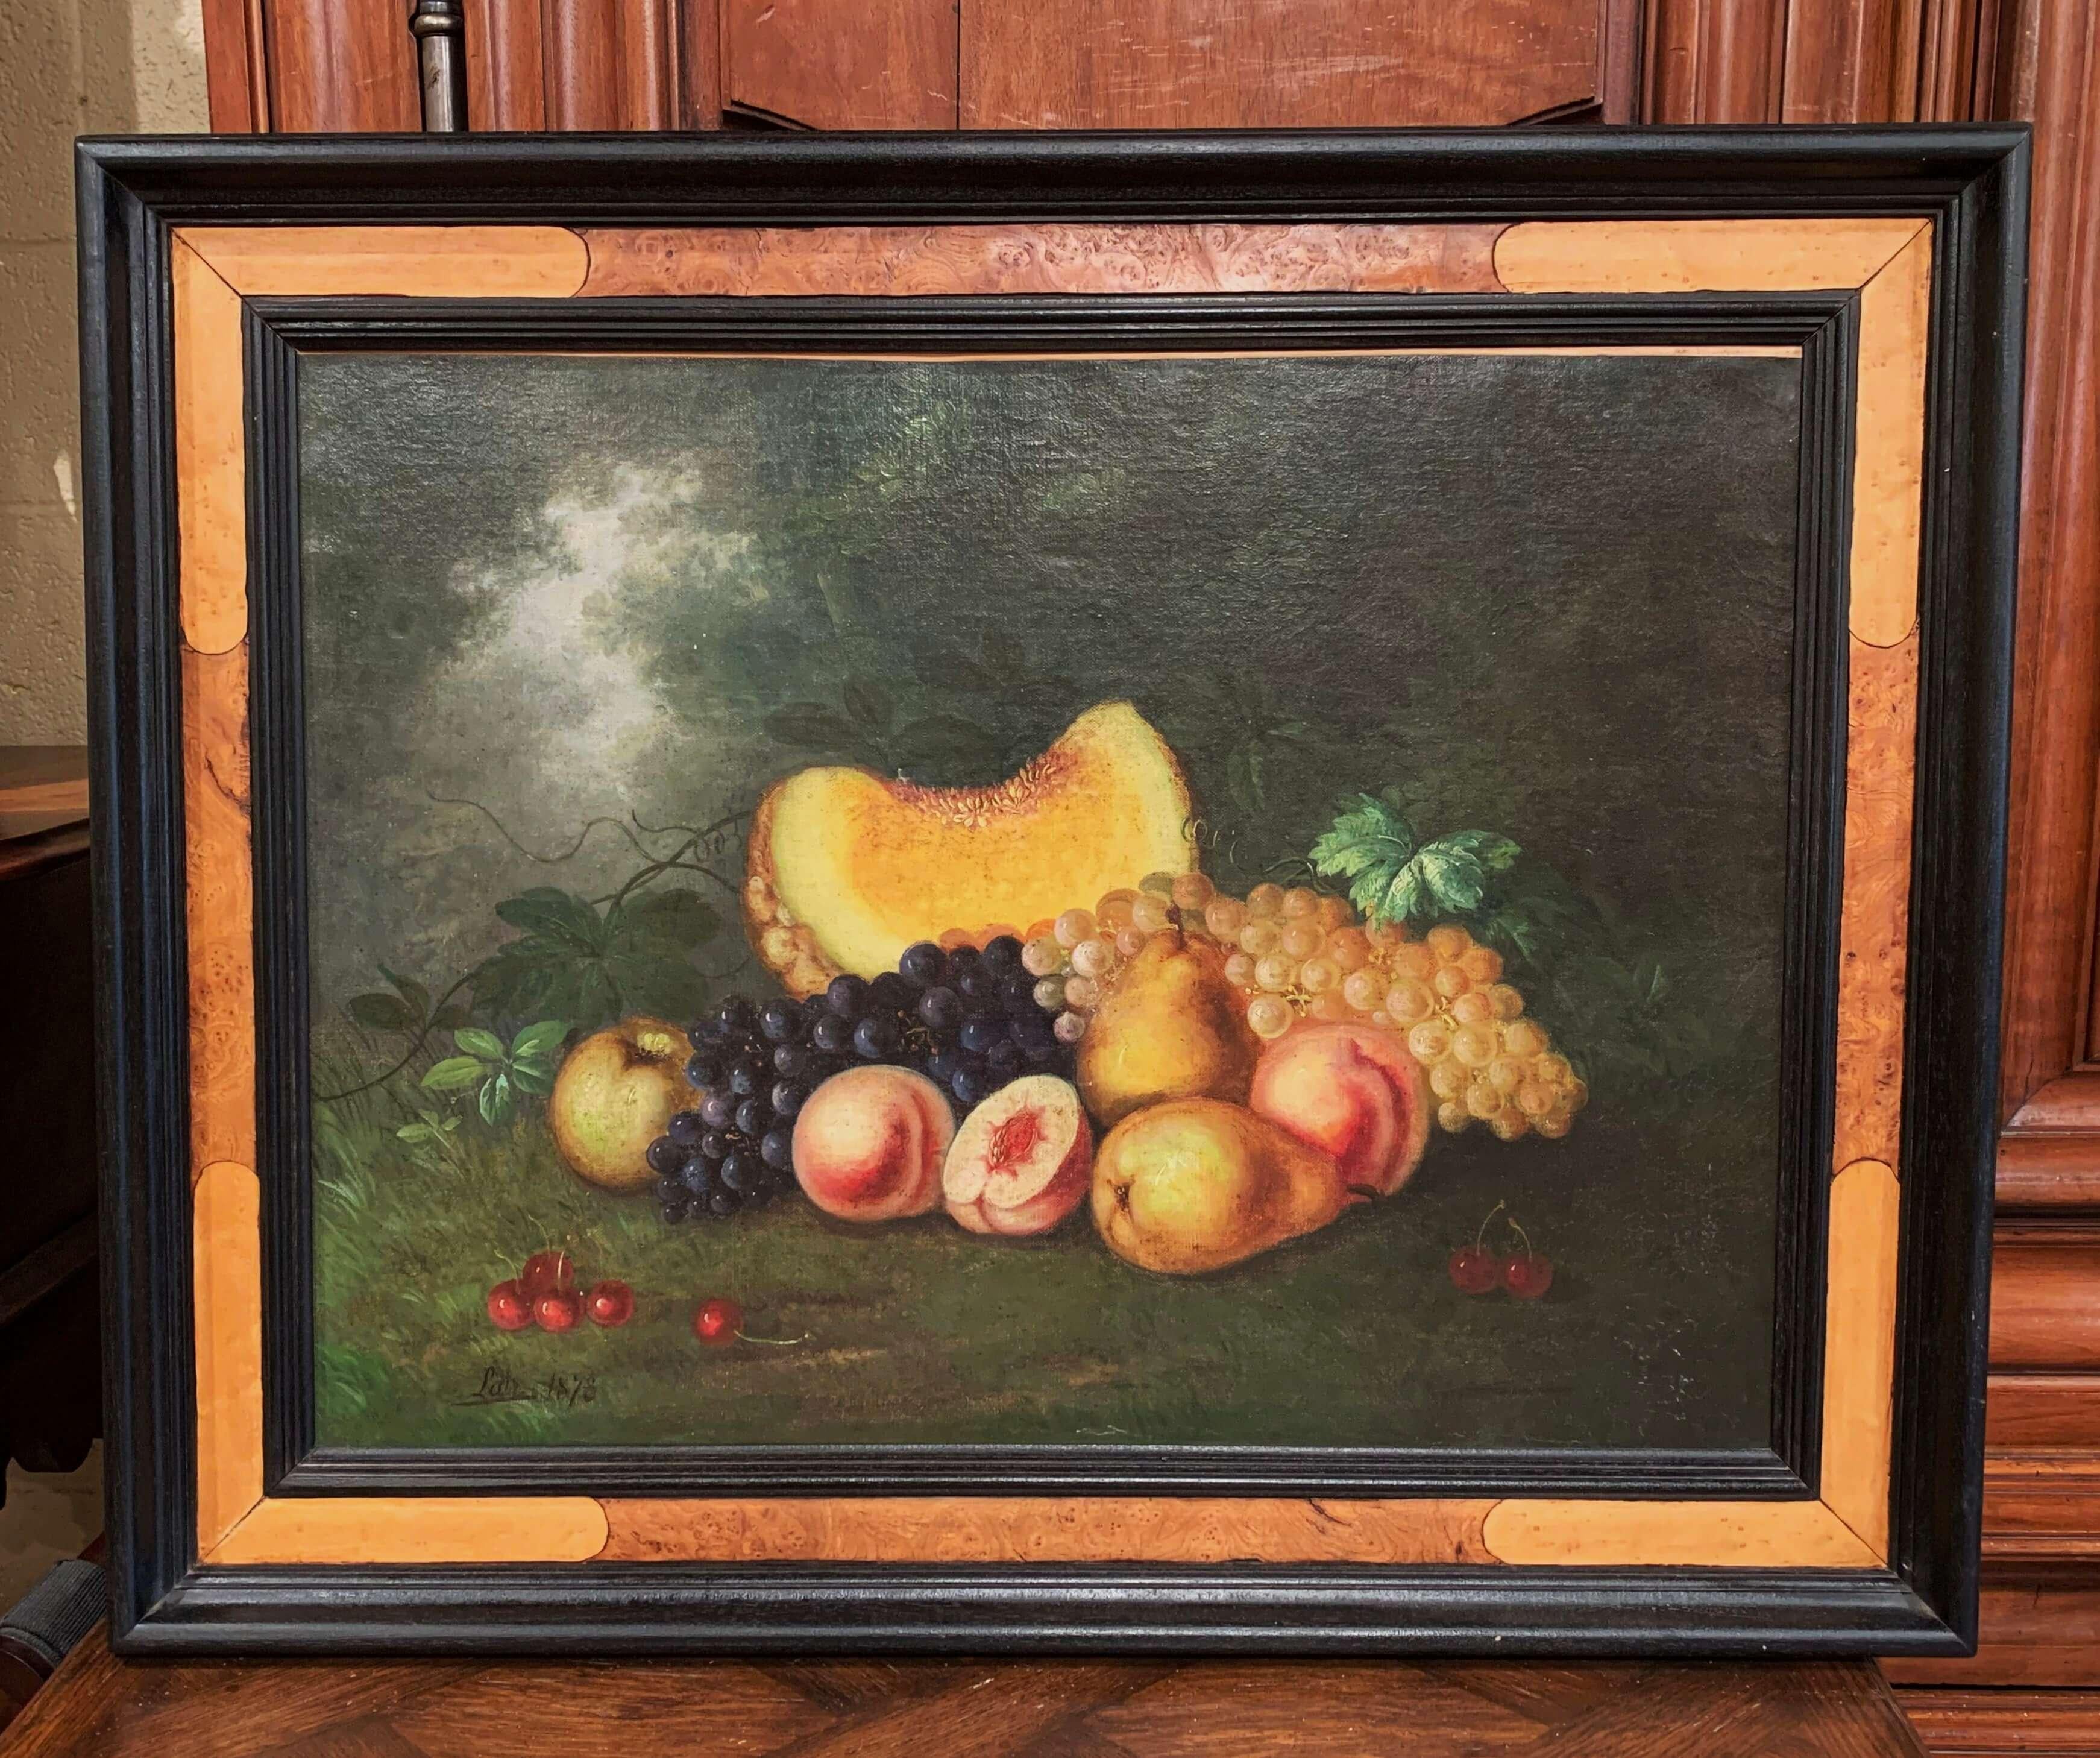 19th Century French Still Life Oil Painting on Canvas Signed and Dated 1878 In Excellent Condition For Sale In Dallas, TX